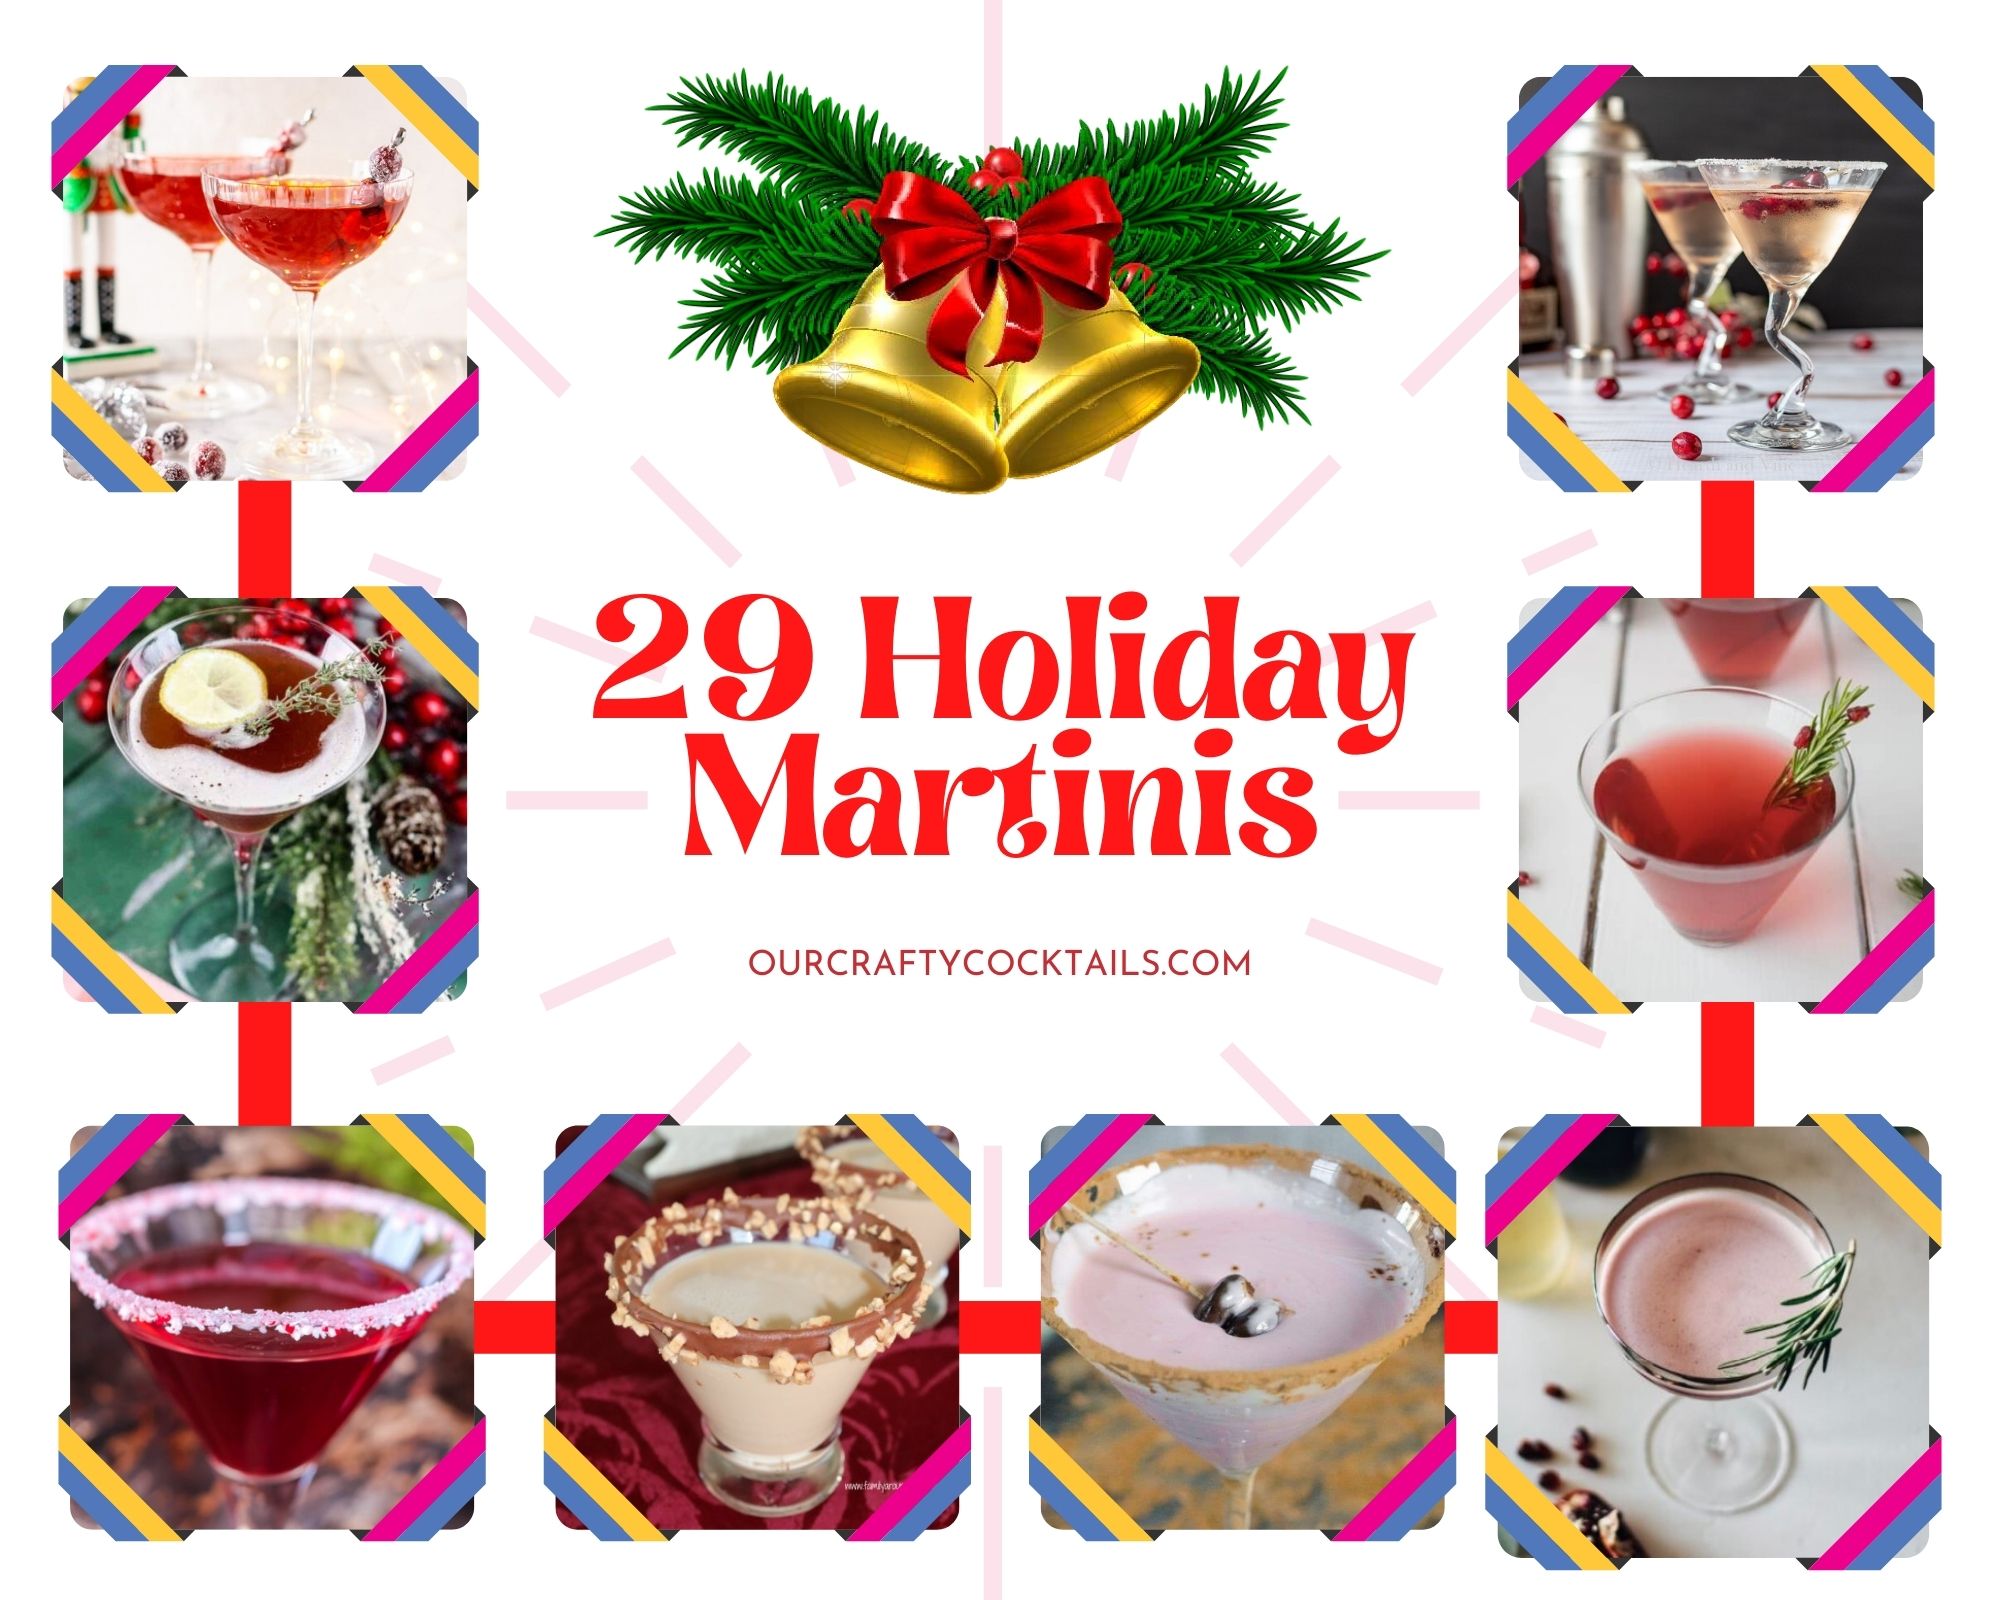 29 holiday martinis facebook image